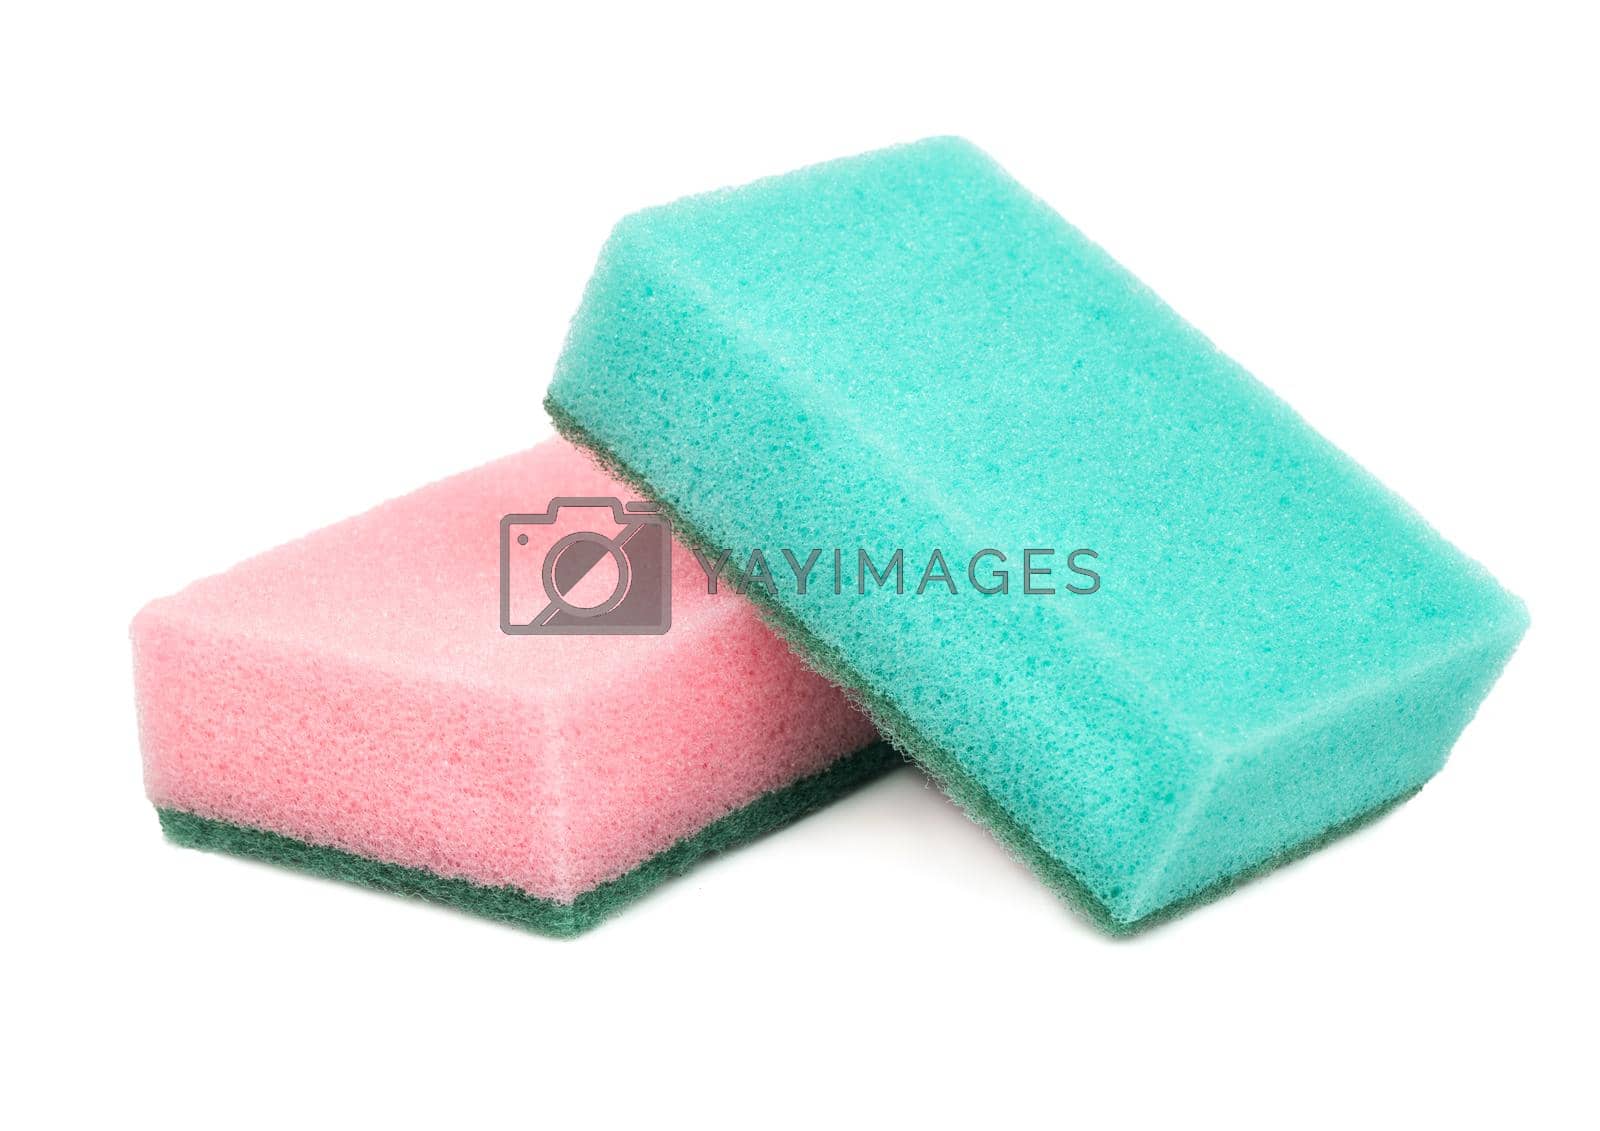 Royalty free image of Dish washing sponge by andregric